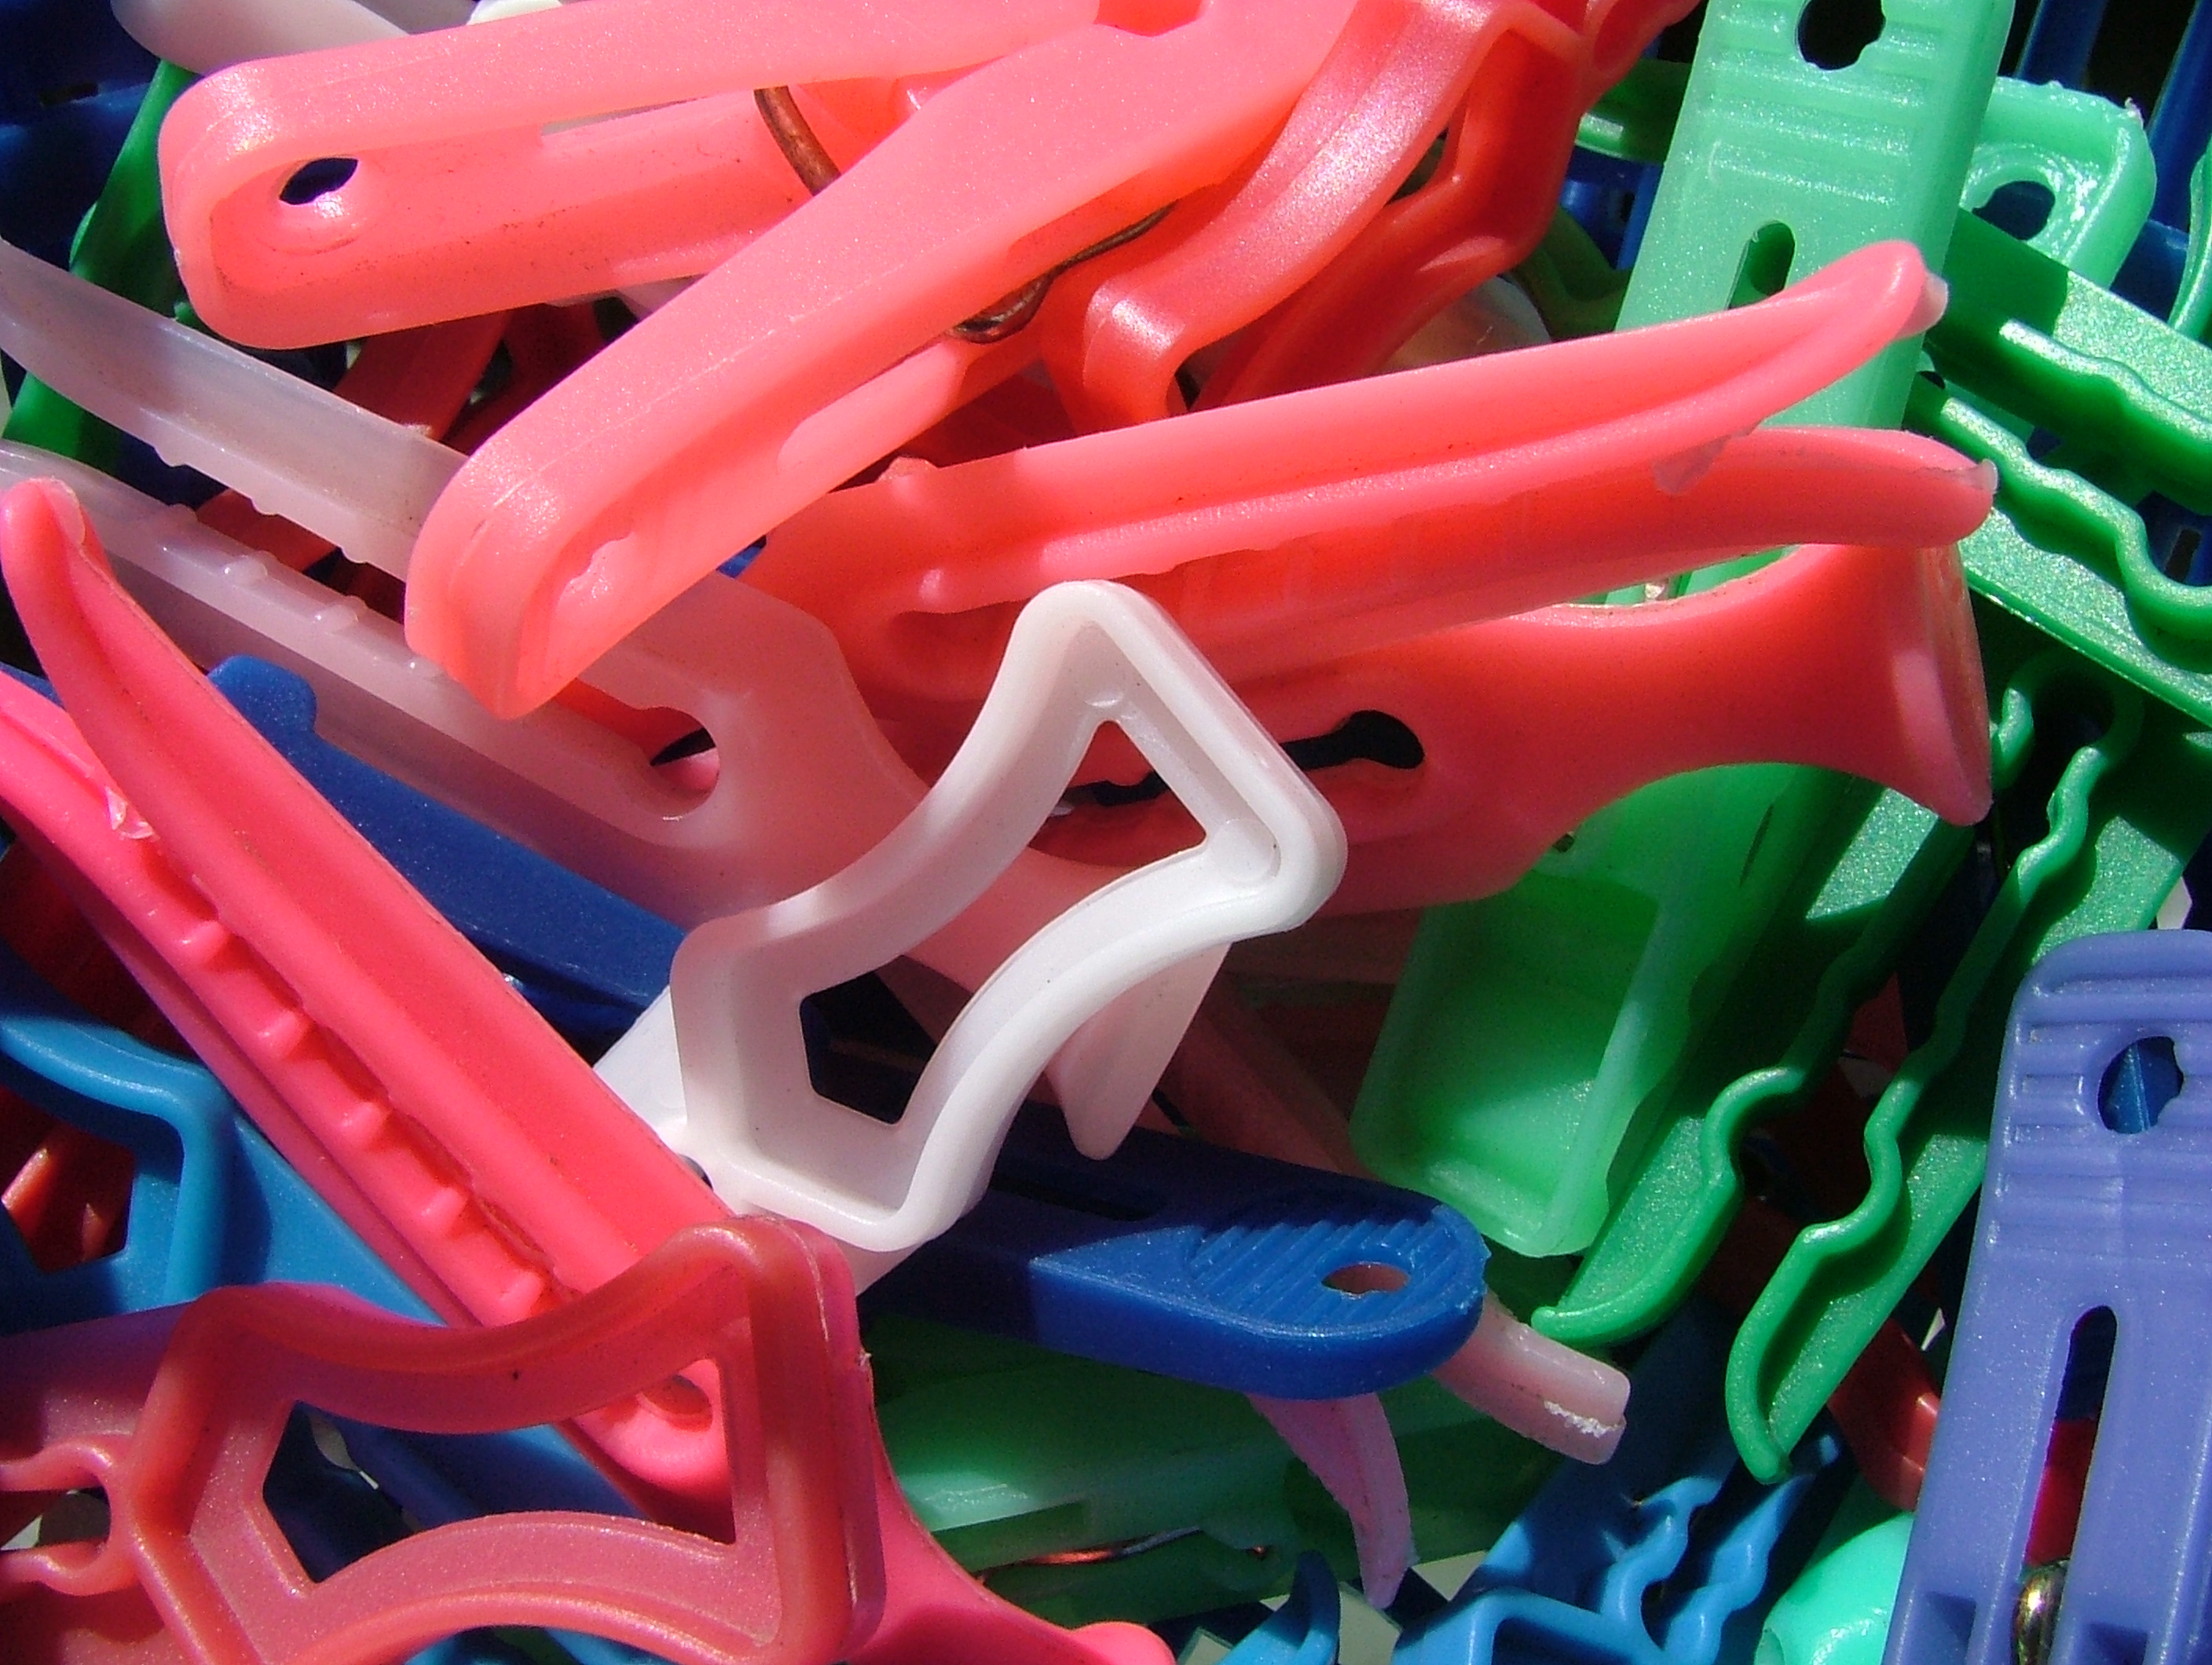 Clothes pegs photo